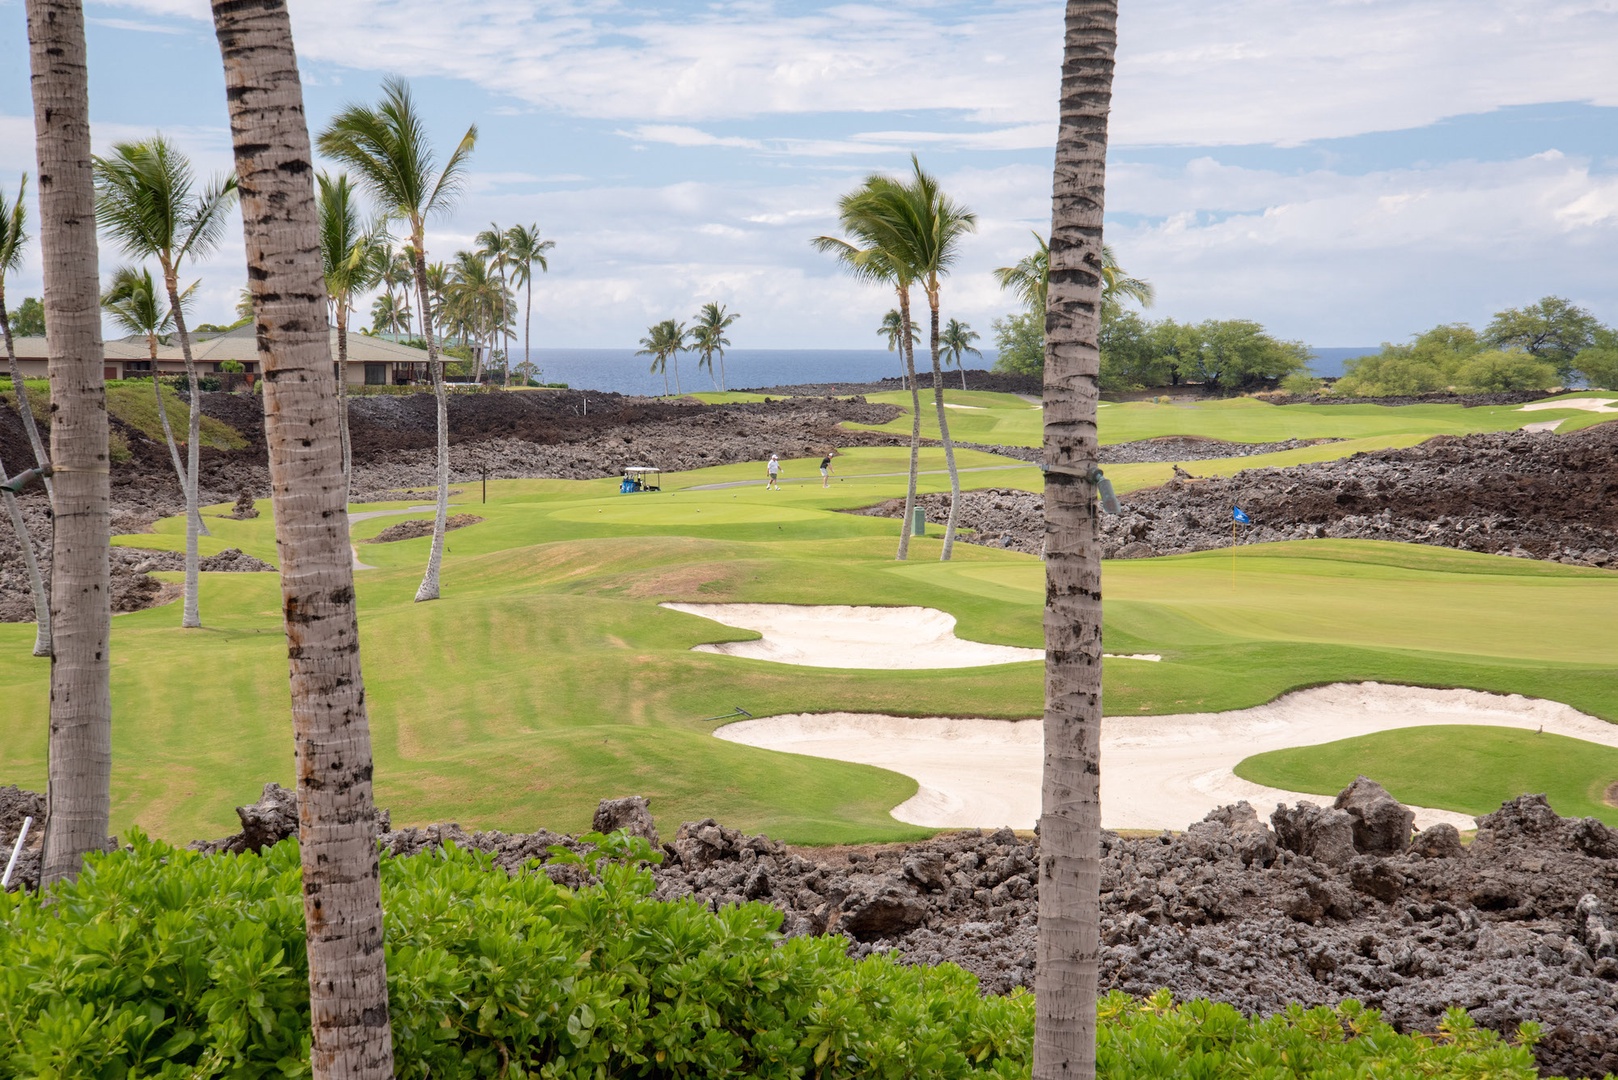 Kamuela Vacation Rentals, 3BD OneOcean (1C) at Mauna Lani Resort - Ocean & Golf Course View from your Private Backyard